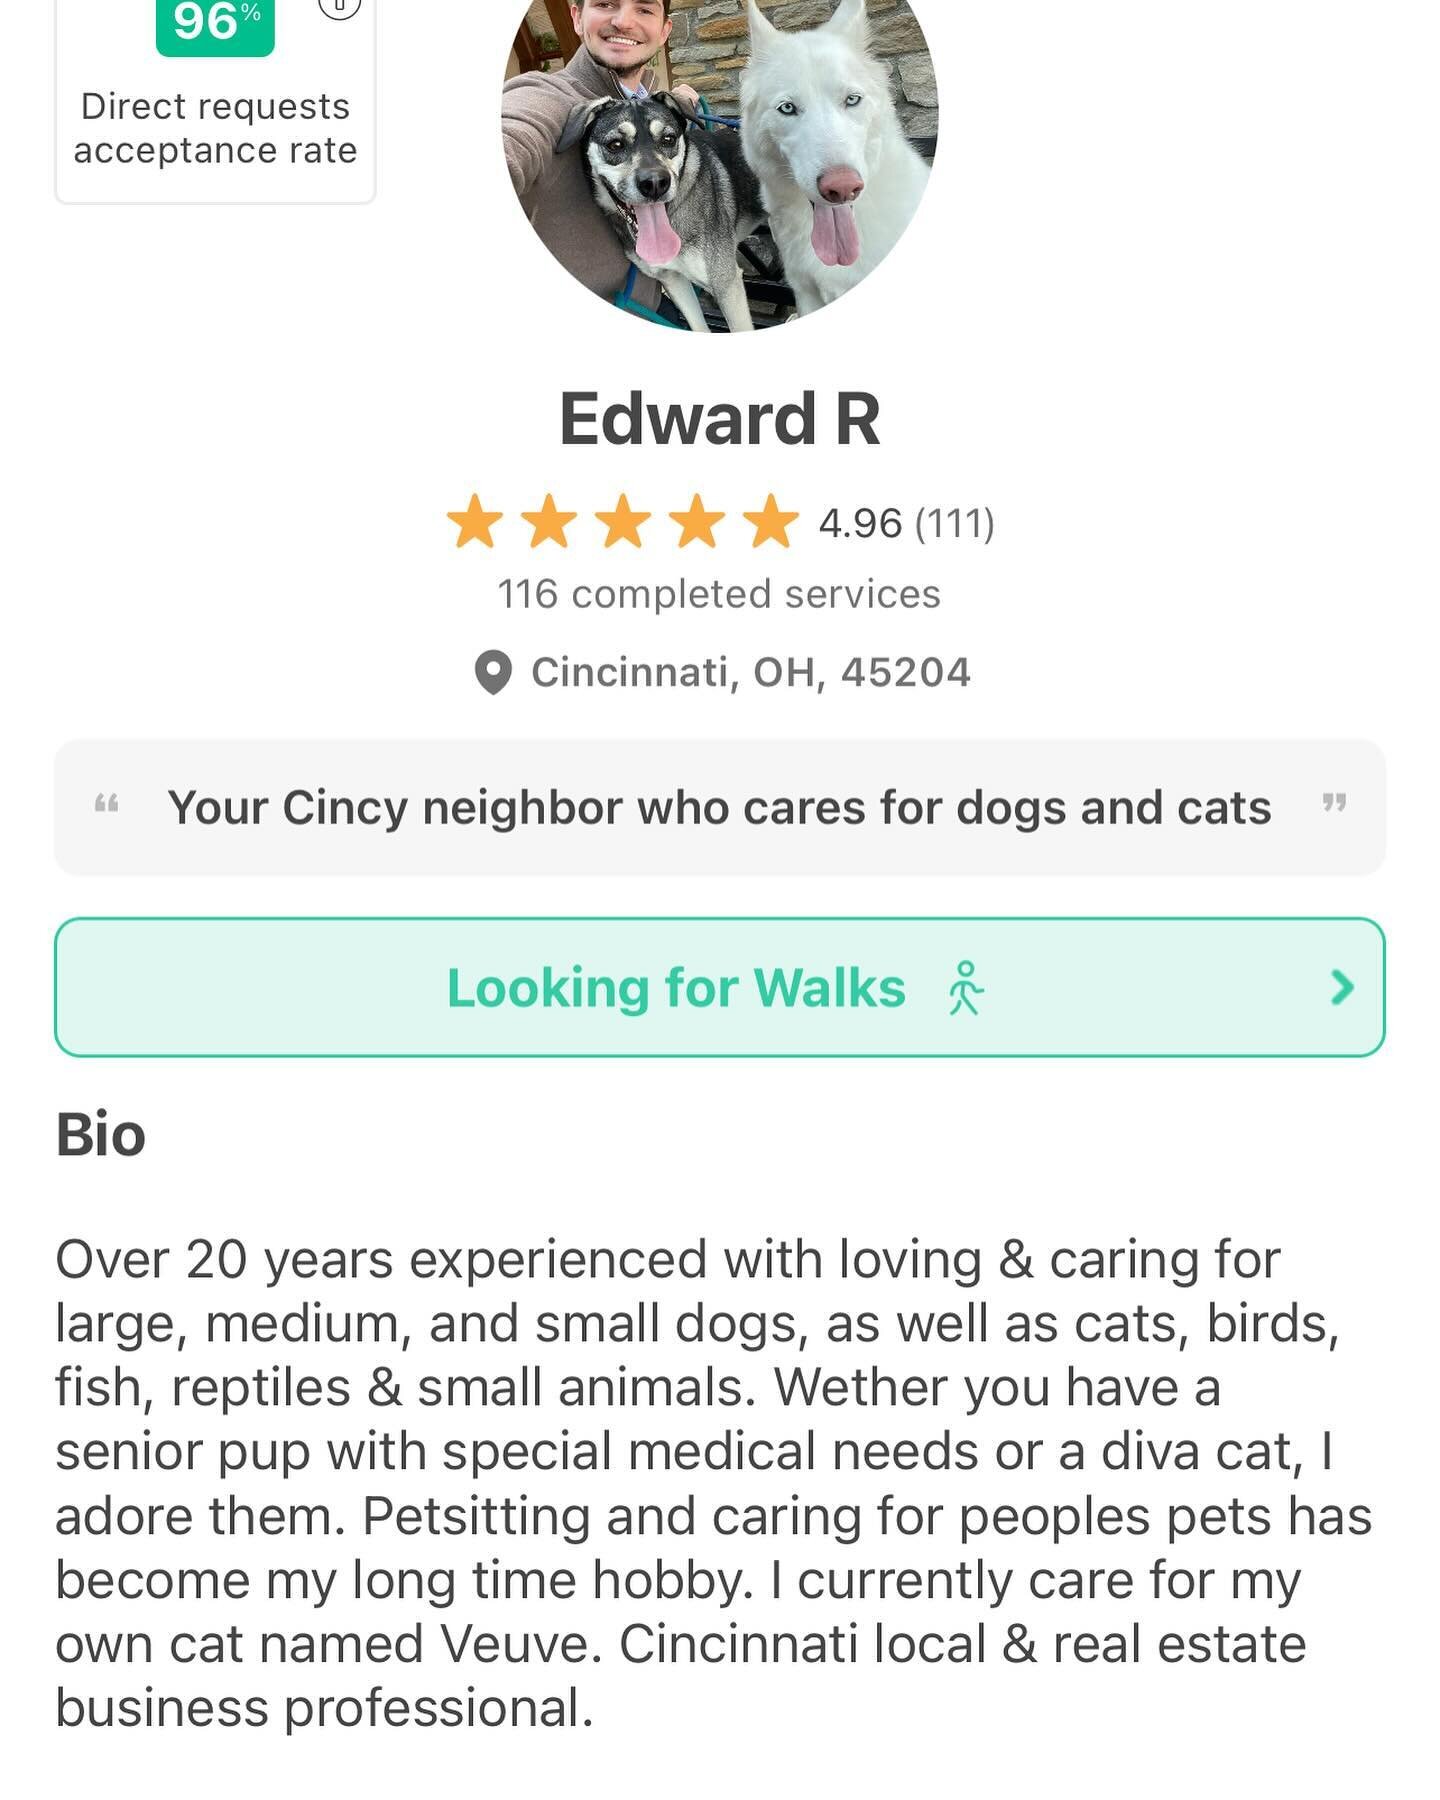 Credibility is everything when it comes to your petcare. Check out my 5star bio from verified app Wag! 😊🫶🏼🐾 

Currently taking bookings at the link in my bio 🐾🦮🐈